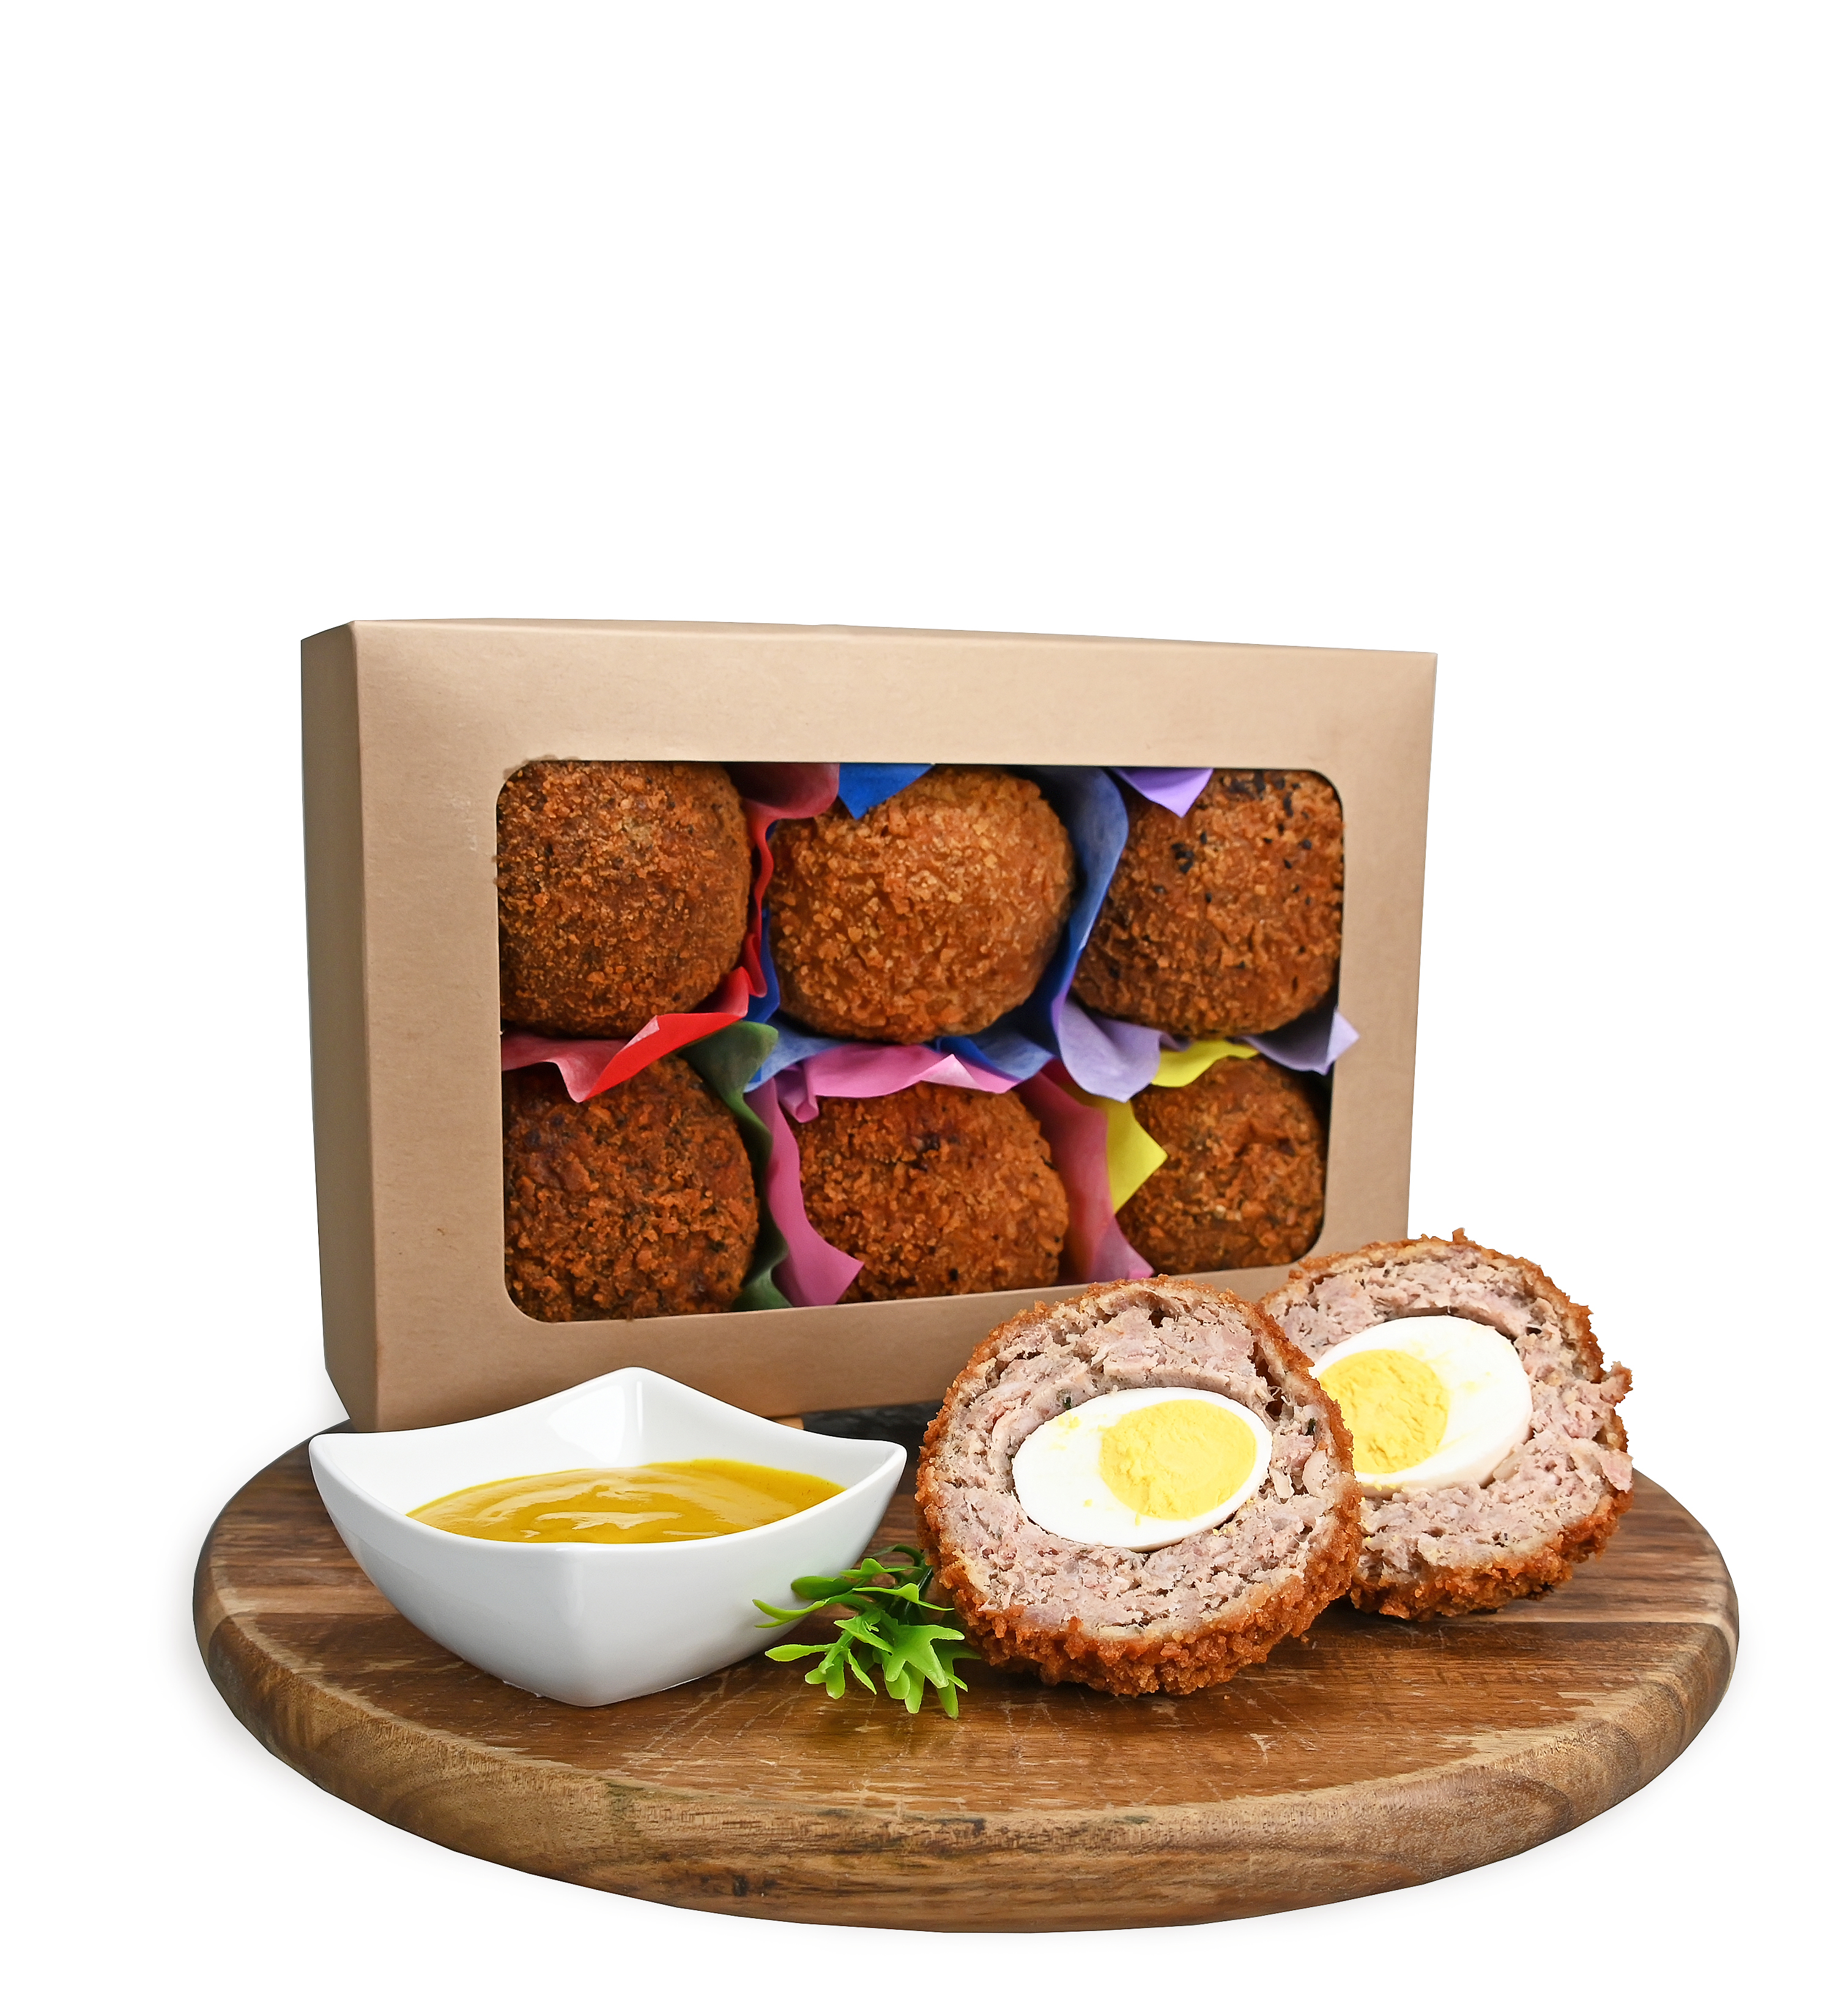 Artisan Scotch Egg Collection - Scotch Egg Delivery - Fresh Baked Goods - Pastry Gifts - Pie Gifts - Pie Delivery